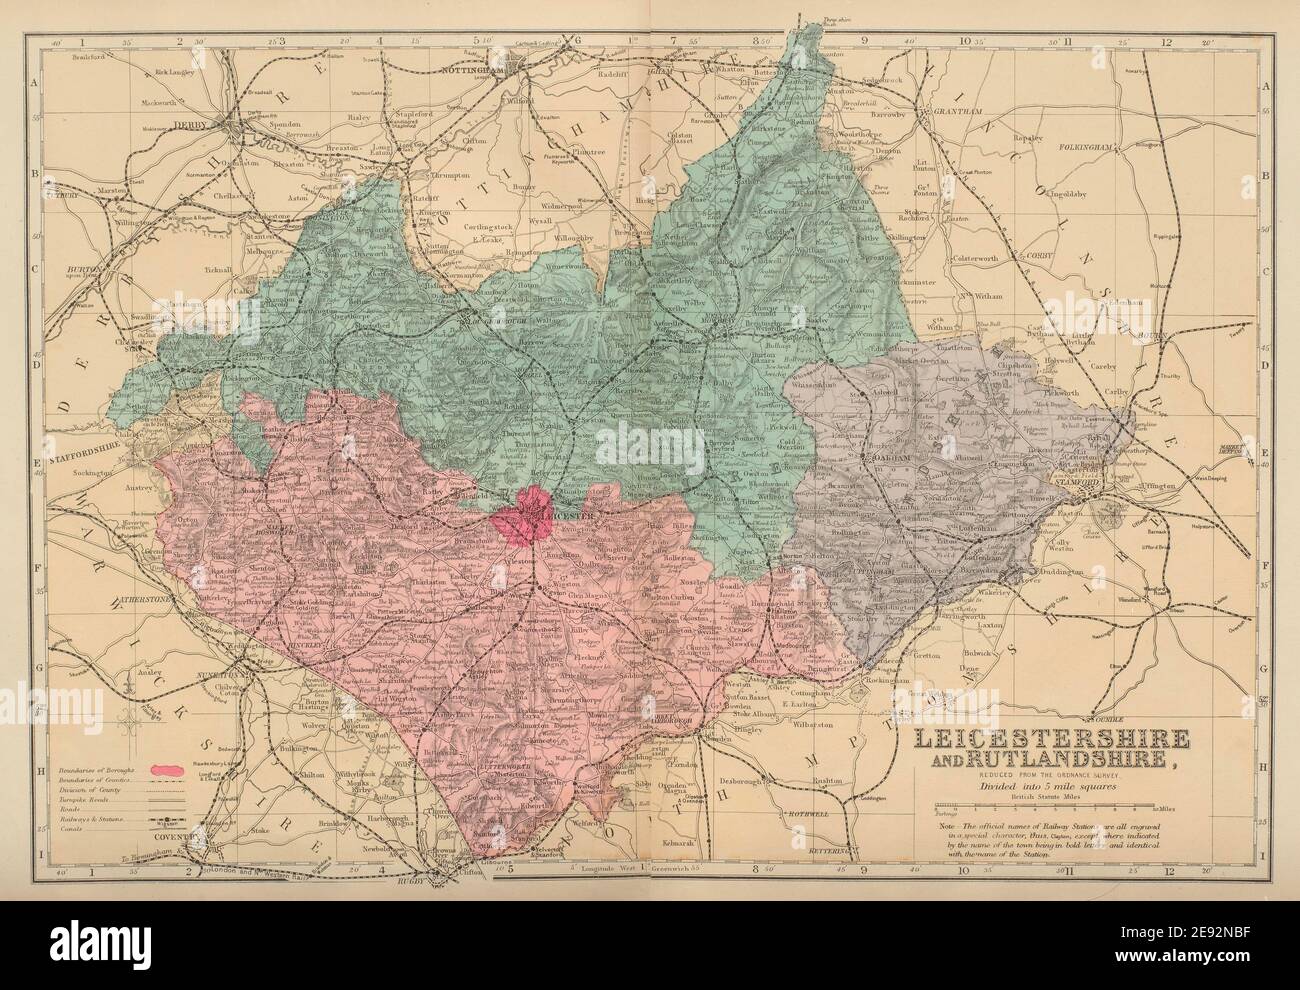 LEICESTERSHIRE & RUTLANDSHIRE antique county map by GW BACON 1883 old Stock Photo